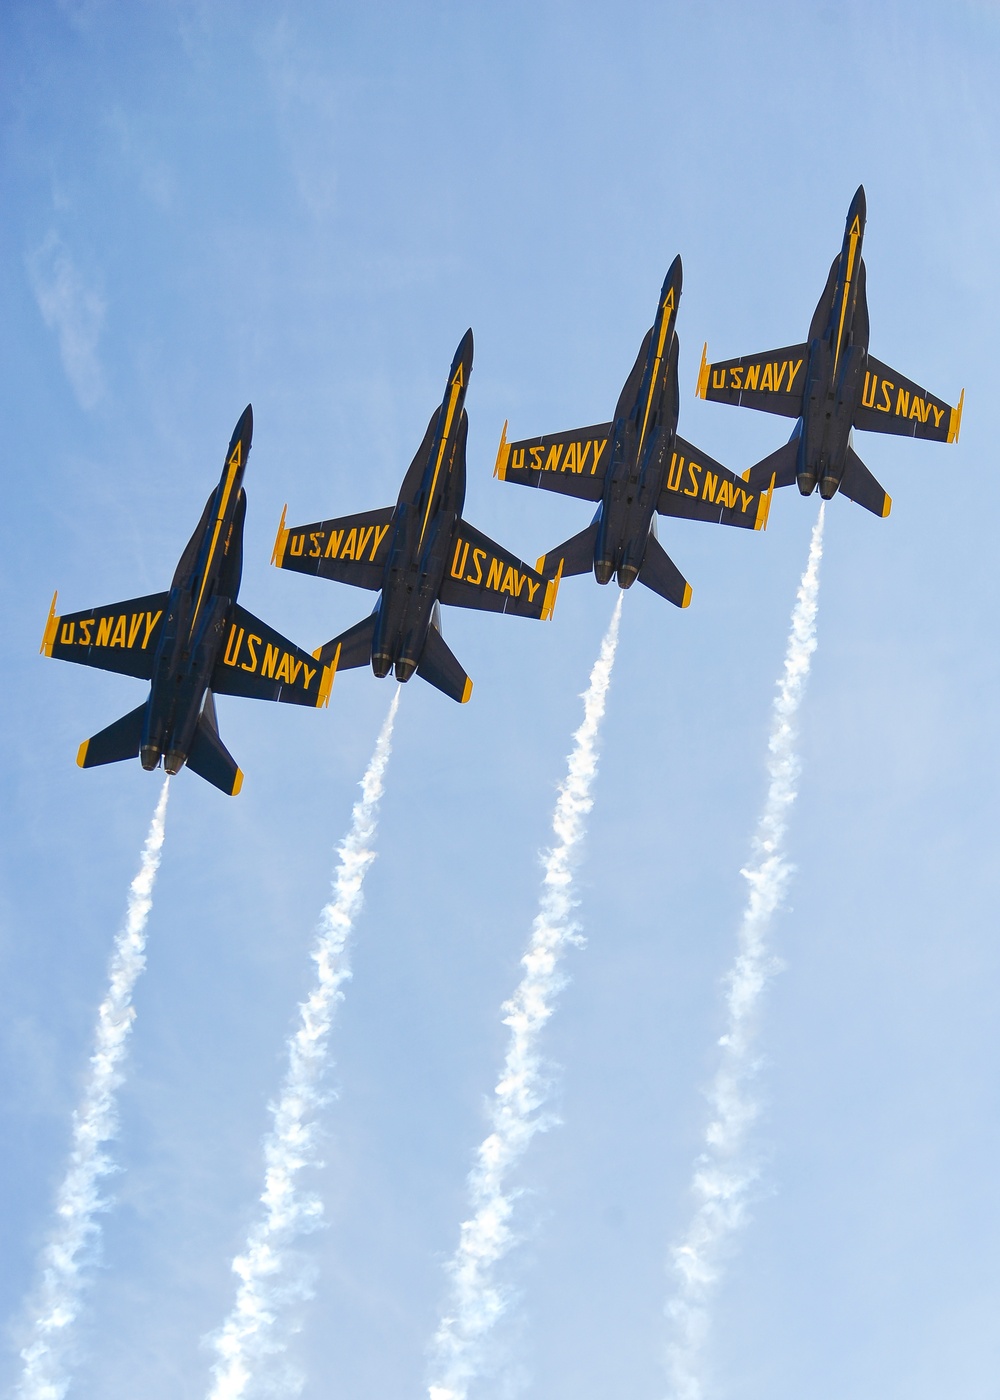 Blue Angels practice demonstration March 6, 2014